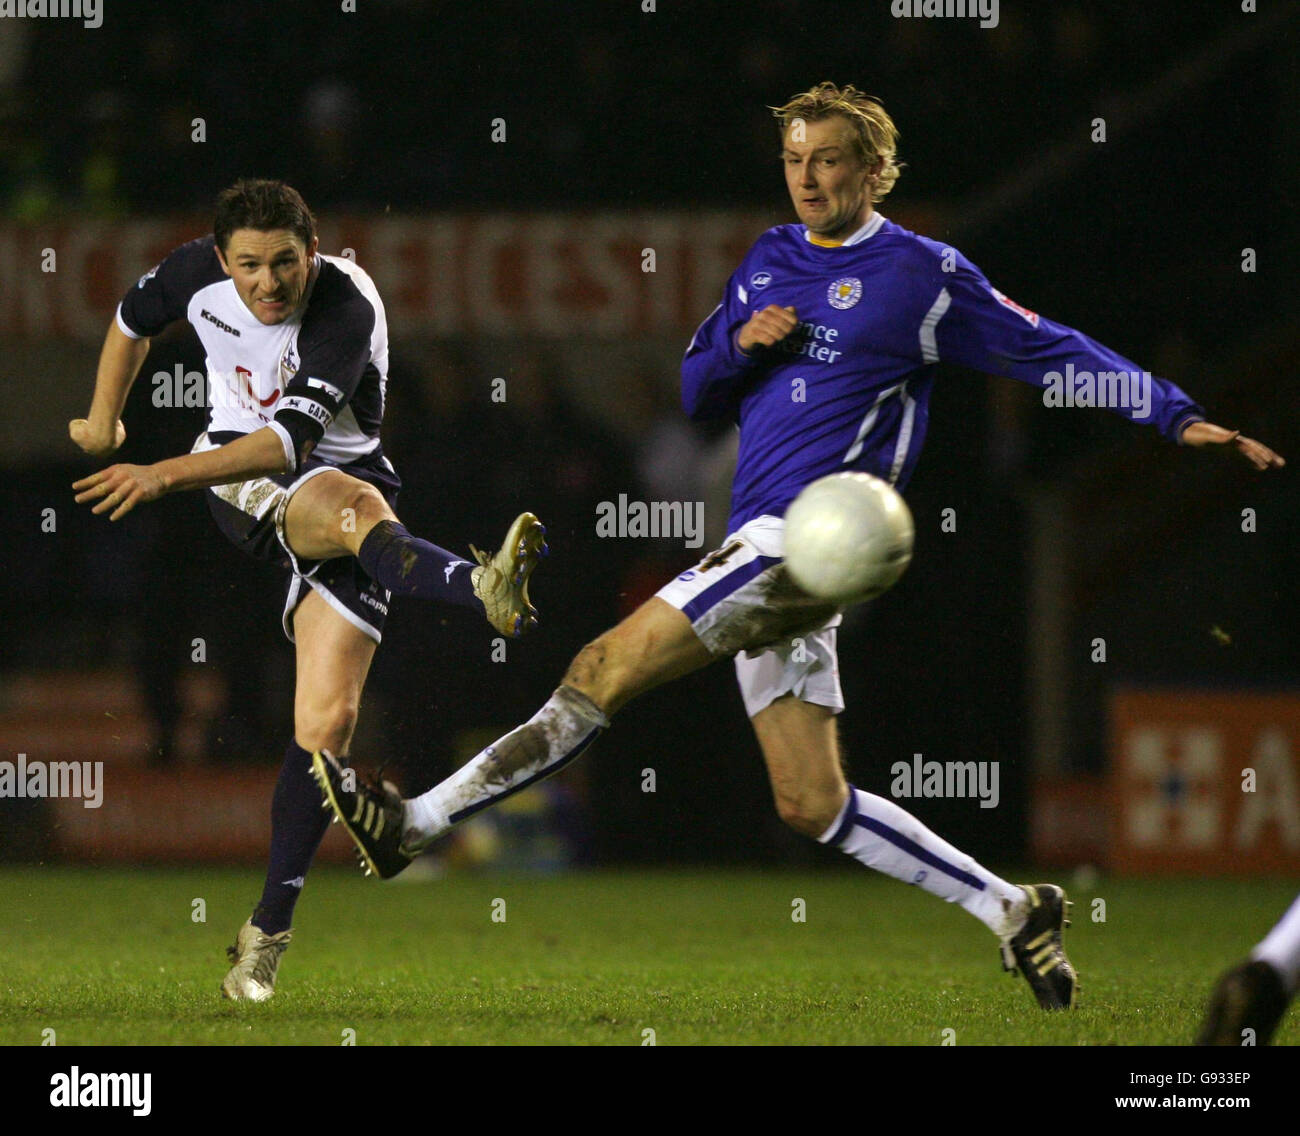 Tottenham Hotspur captain Robbie Keane (L) in action against Leicester City's Stephen Hughes during the FA Cup Third Round match at the Walkers Stadium, Leicester, Sunday January 8, 2006. PRESS ASSOCIATION Photo. Photo credit should read: Nick Potts/PA. Stock Photo